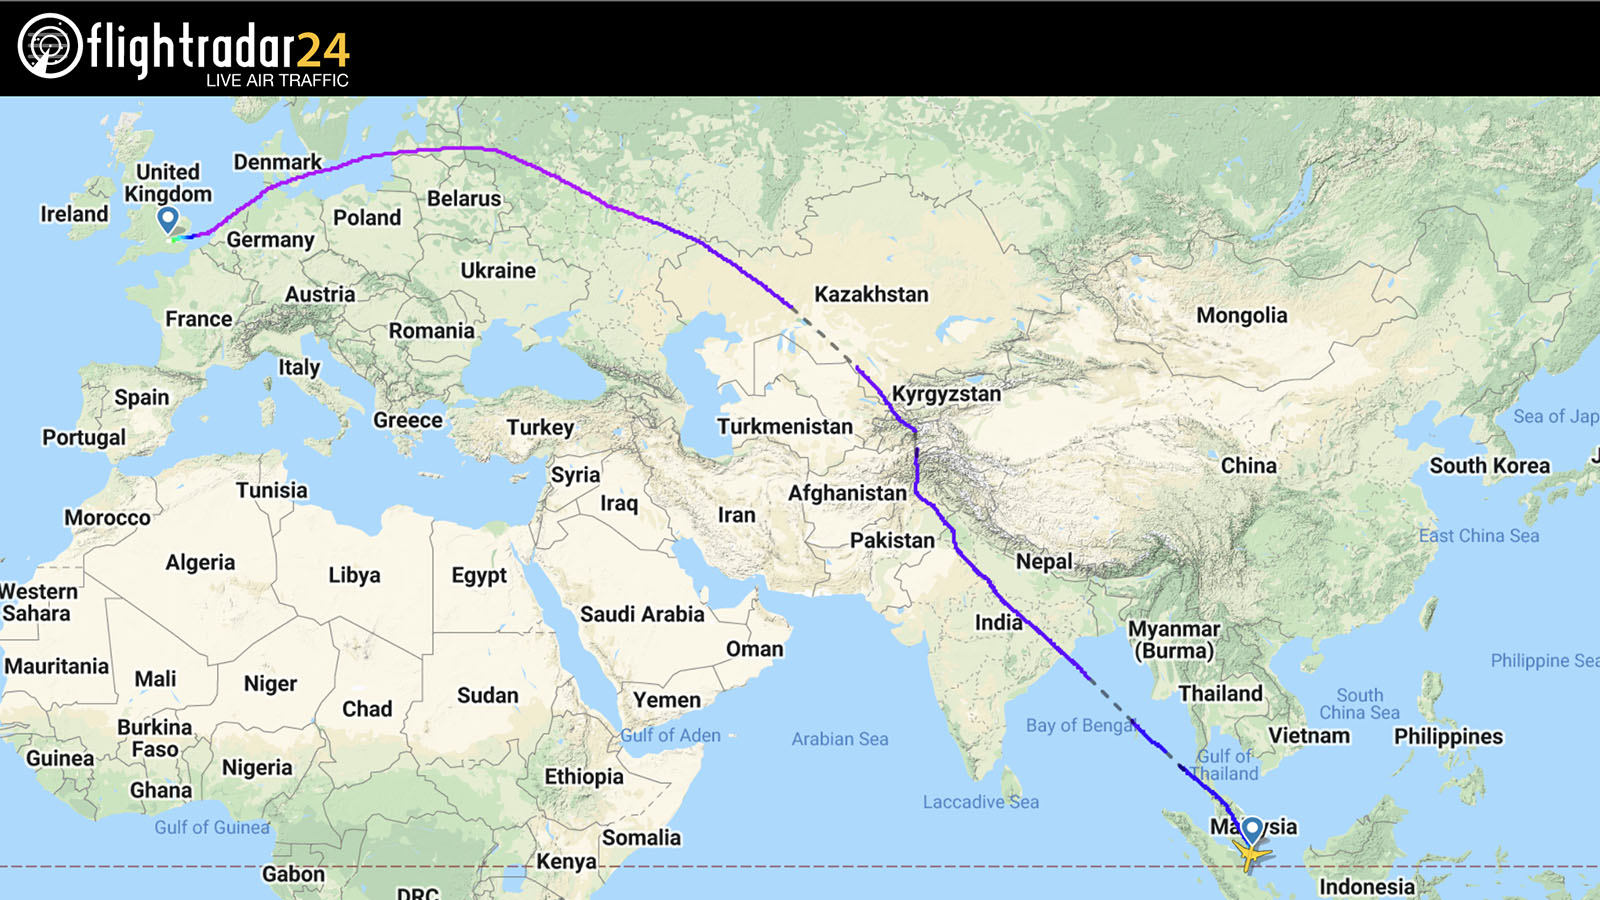 Singapore Airlines' previous path to London